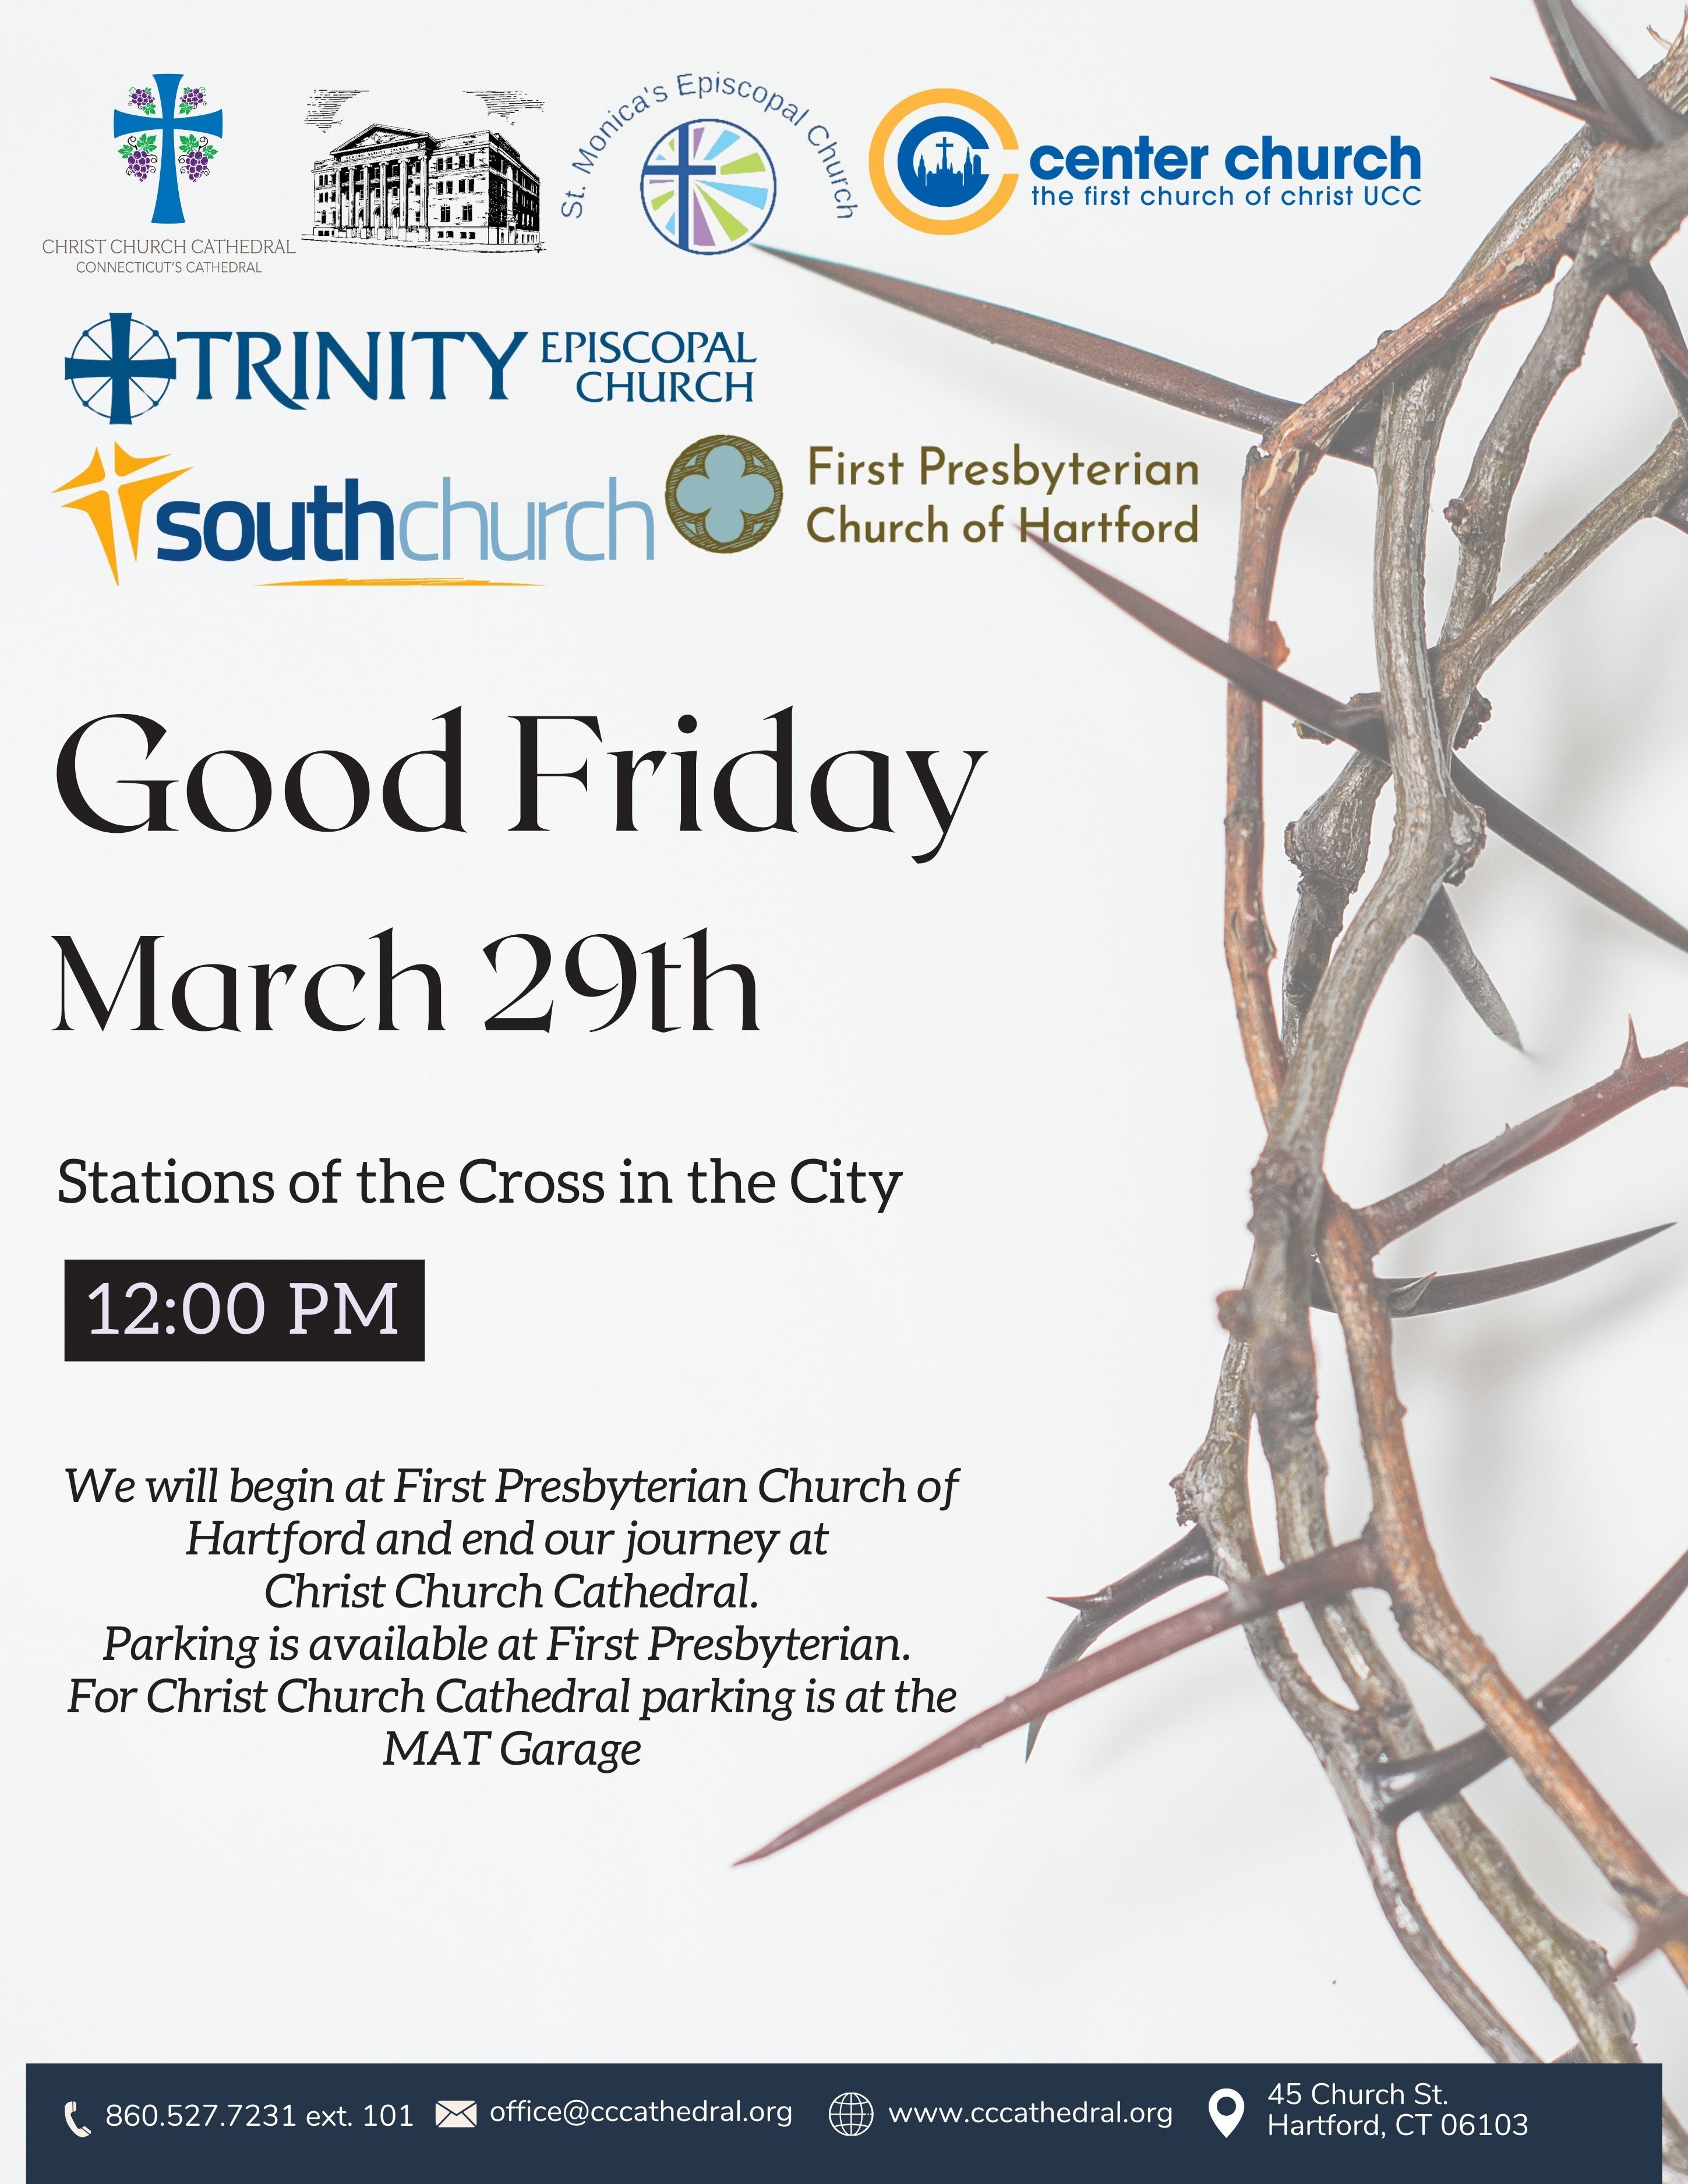 Good Friday ~ Stations of the Cross in the city